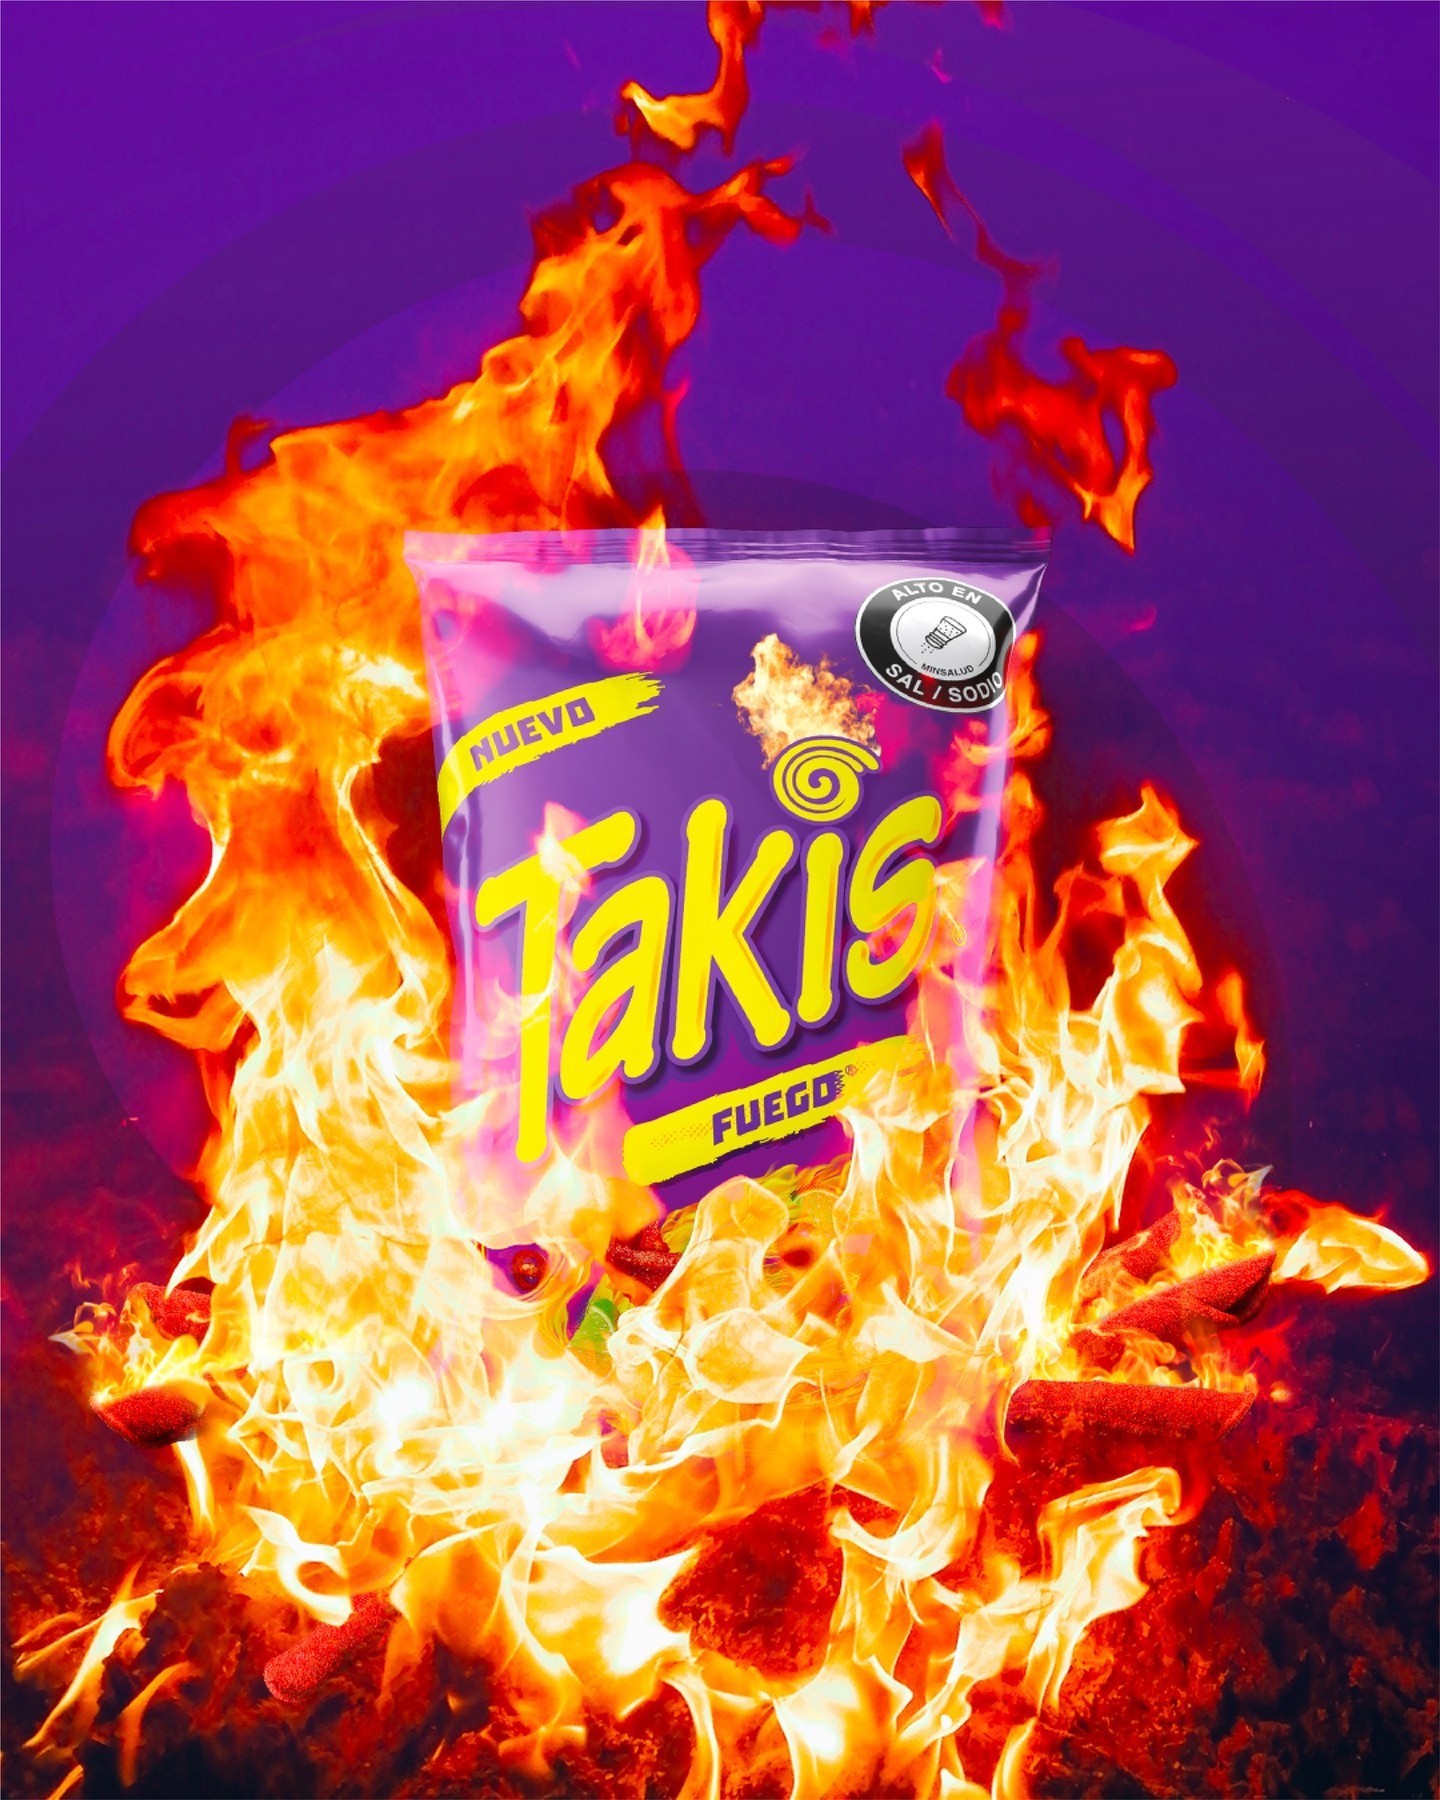 Takis fuego rolled tortilla chips, hot chili pepper and lime